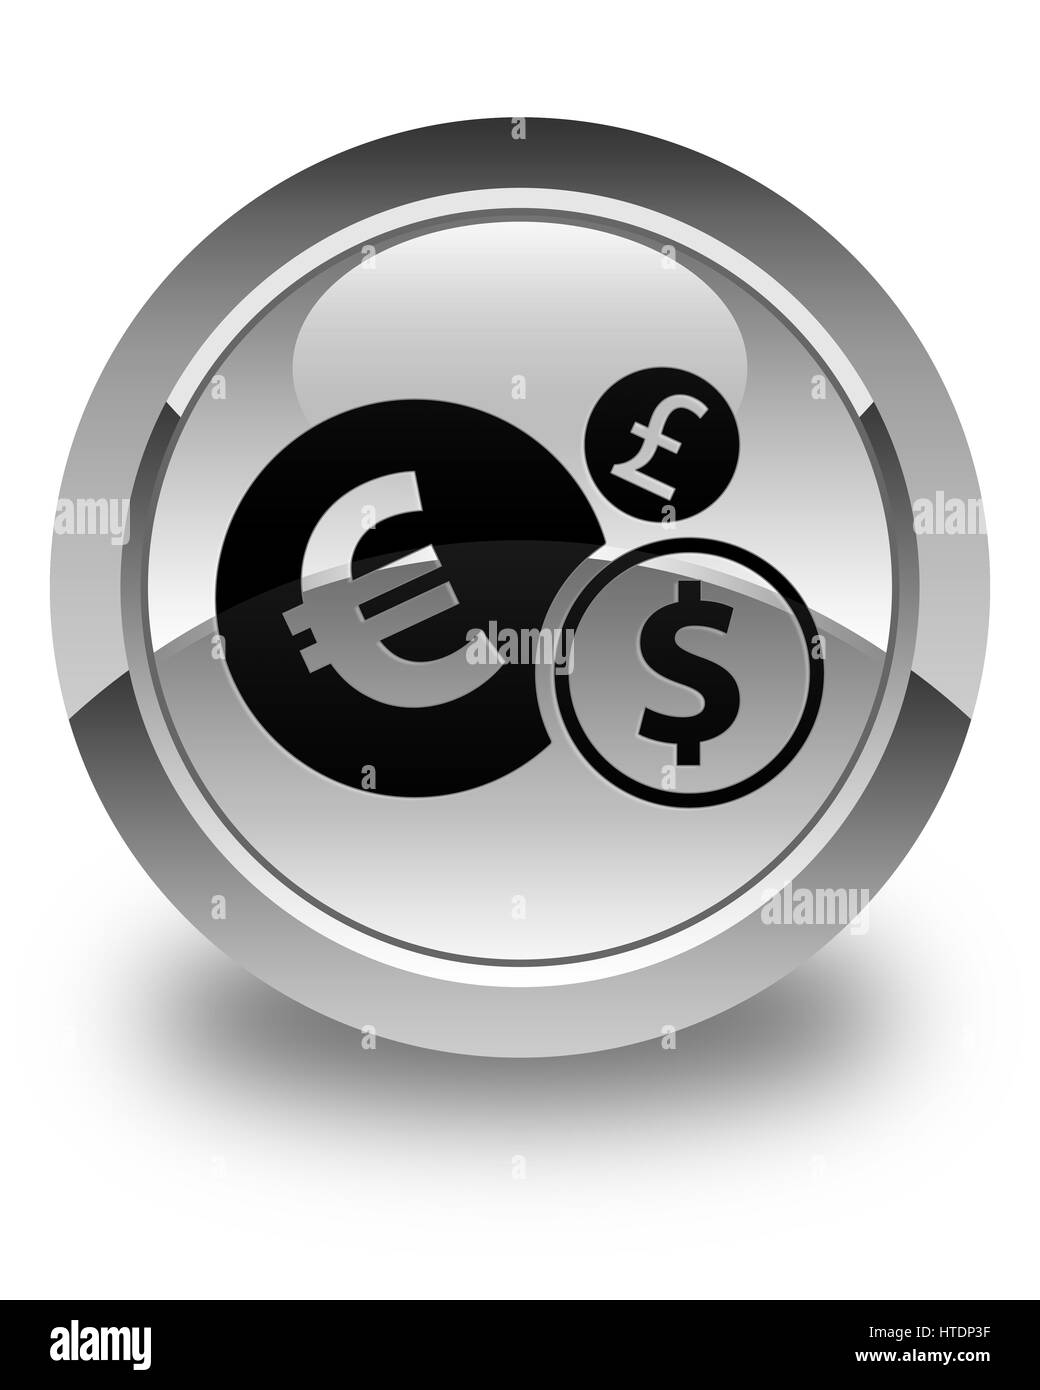 Finances icon isolated on glossy white round button abstract illustration Stock Photo